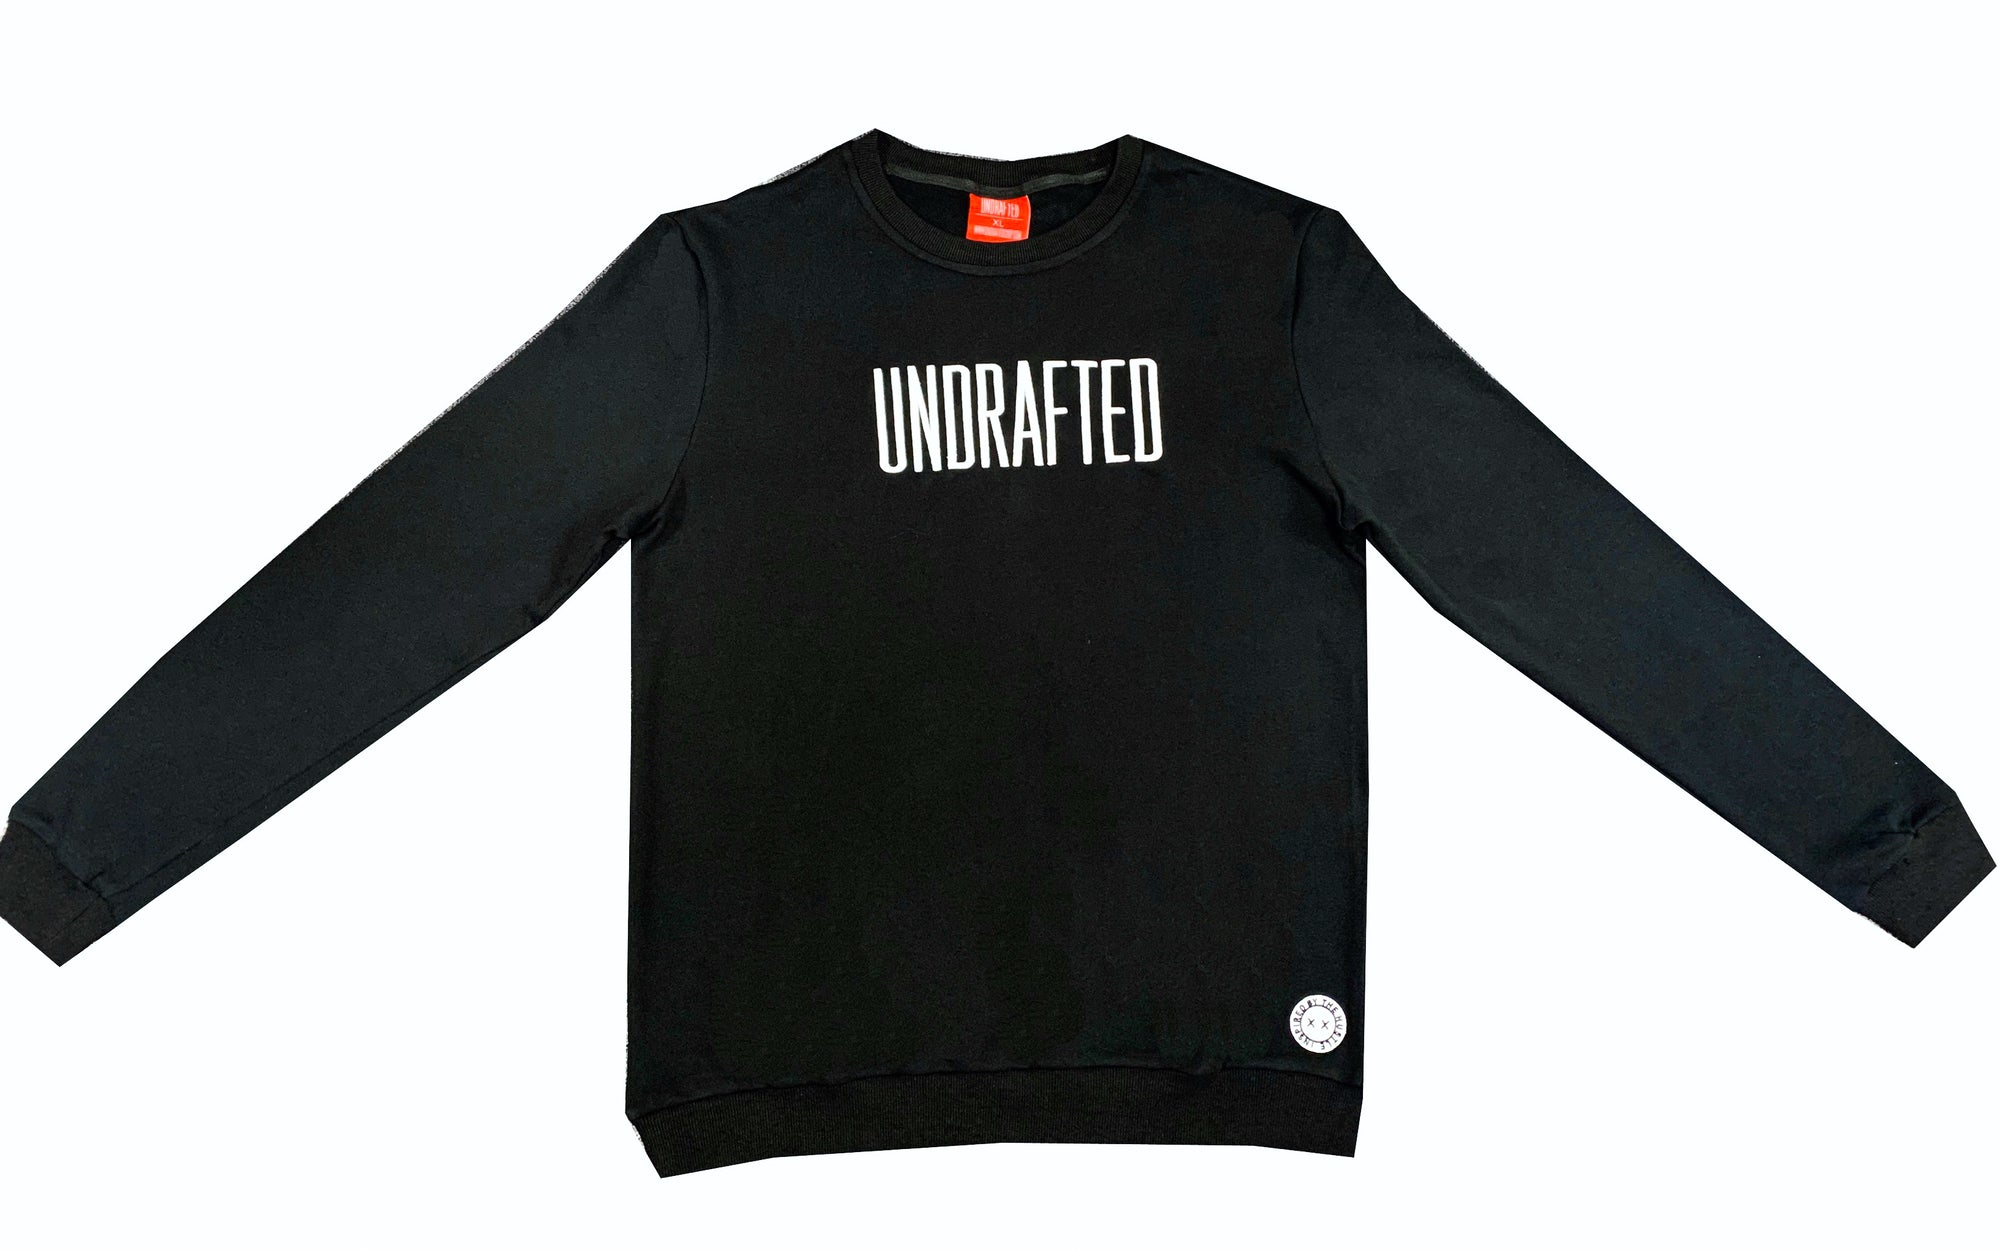 Embroidered Undrafted Sweatshirt Black/White